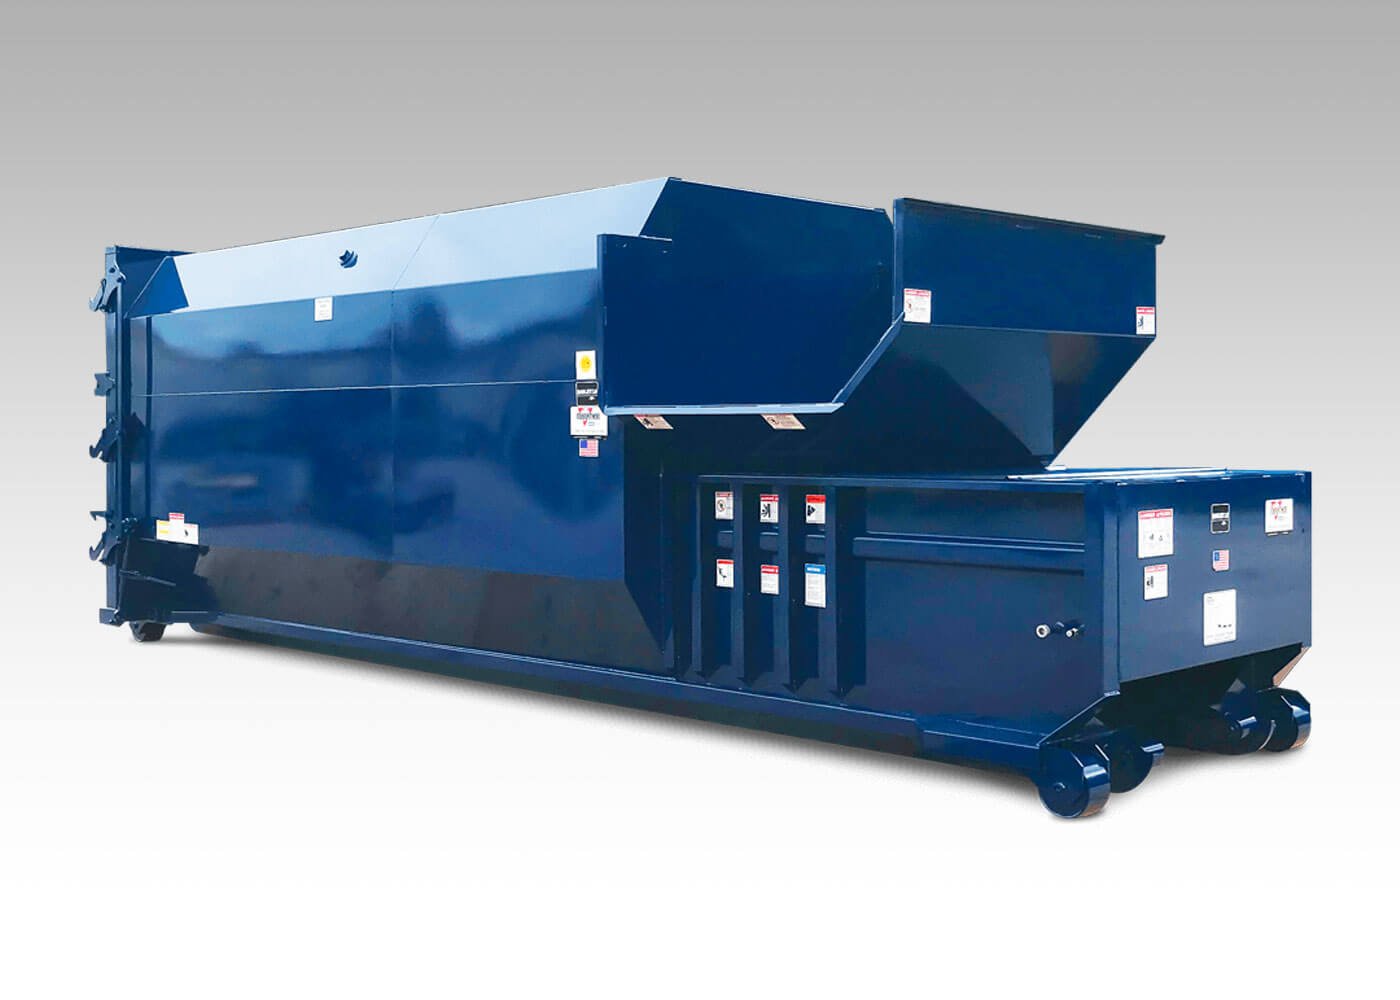 Marathon Rj-100 self contained trash compactors for commercial waste compaction materials